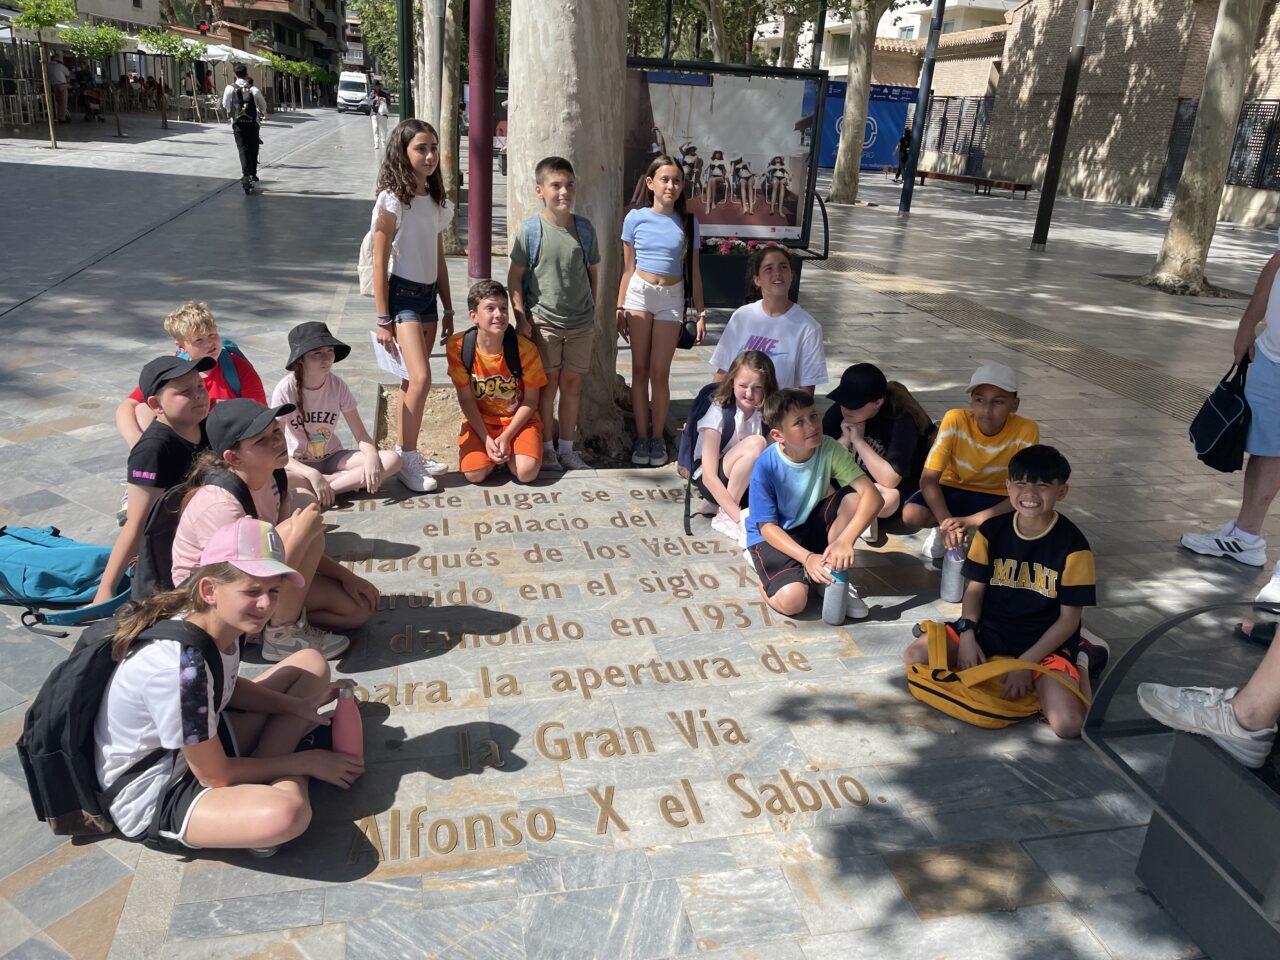 A group of boys and girls sit and stand on the pavement around some paving slabs with golden writing in Spanish. The street can be seen around them which is clean with trees and the sun is shining.